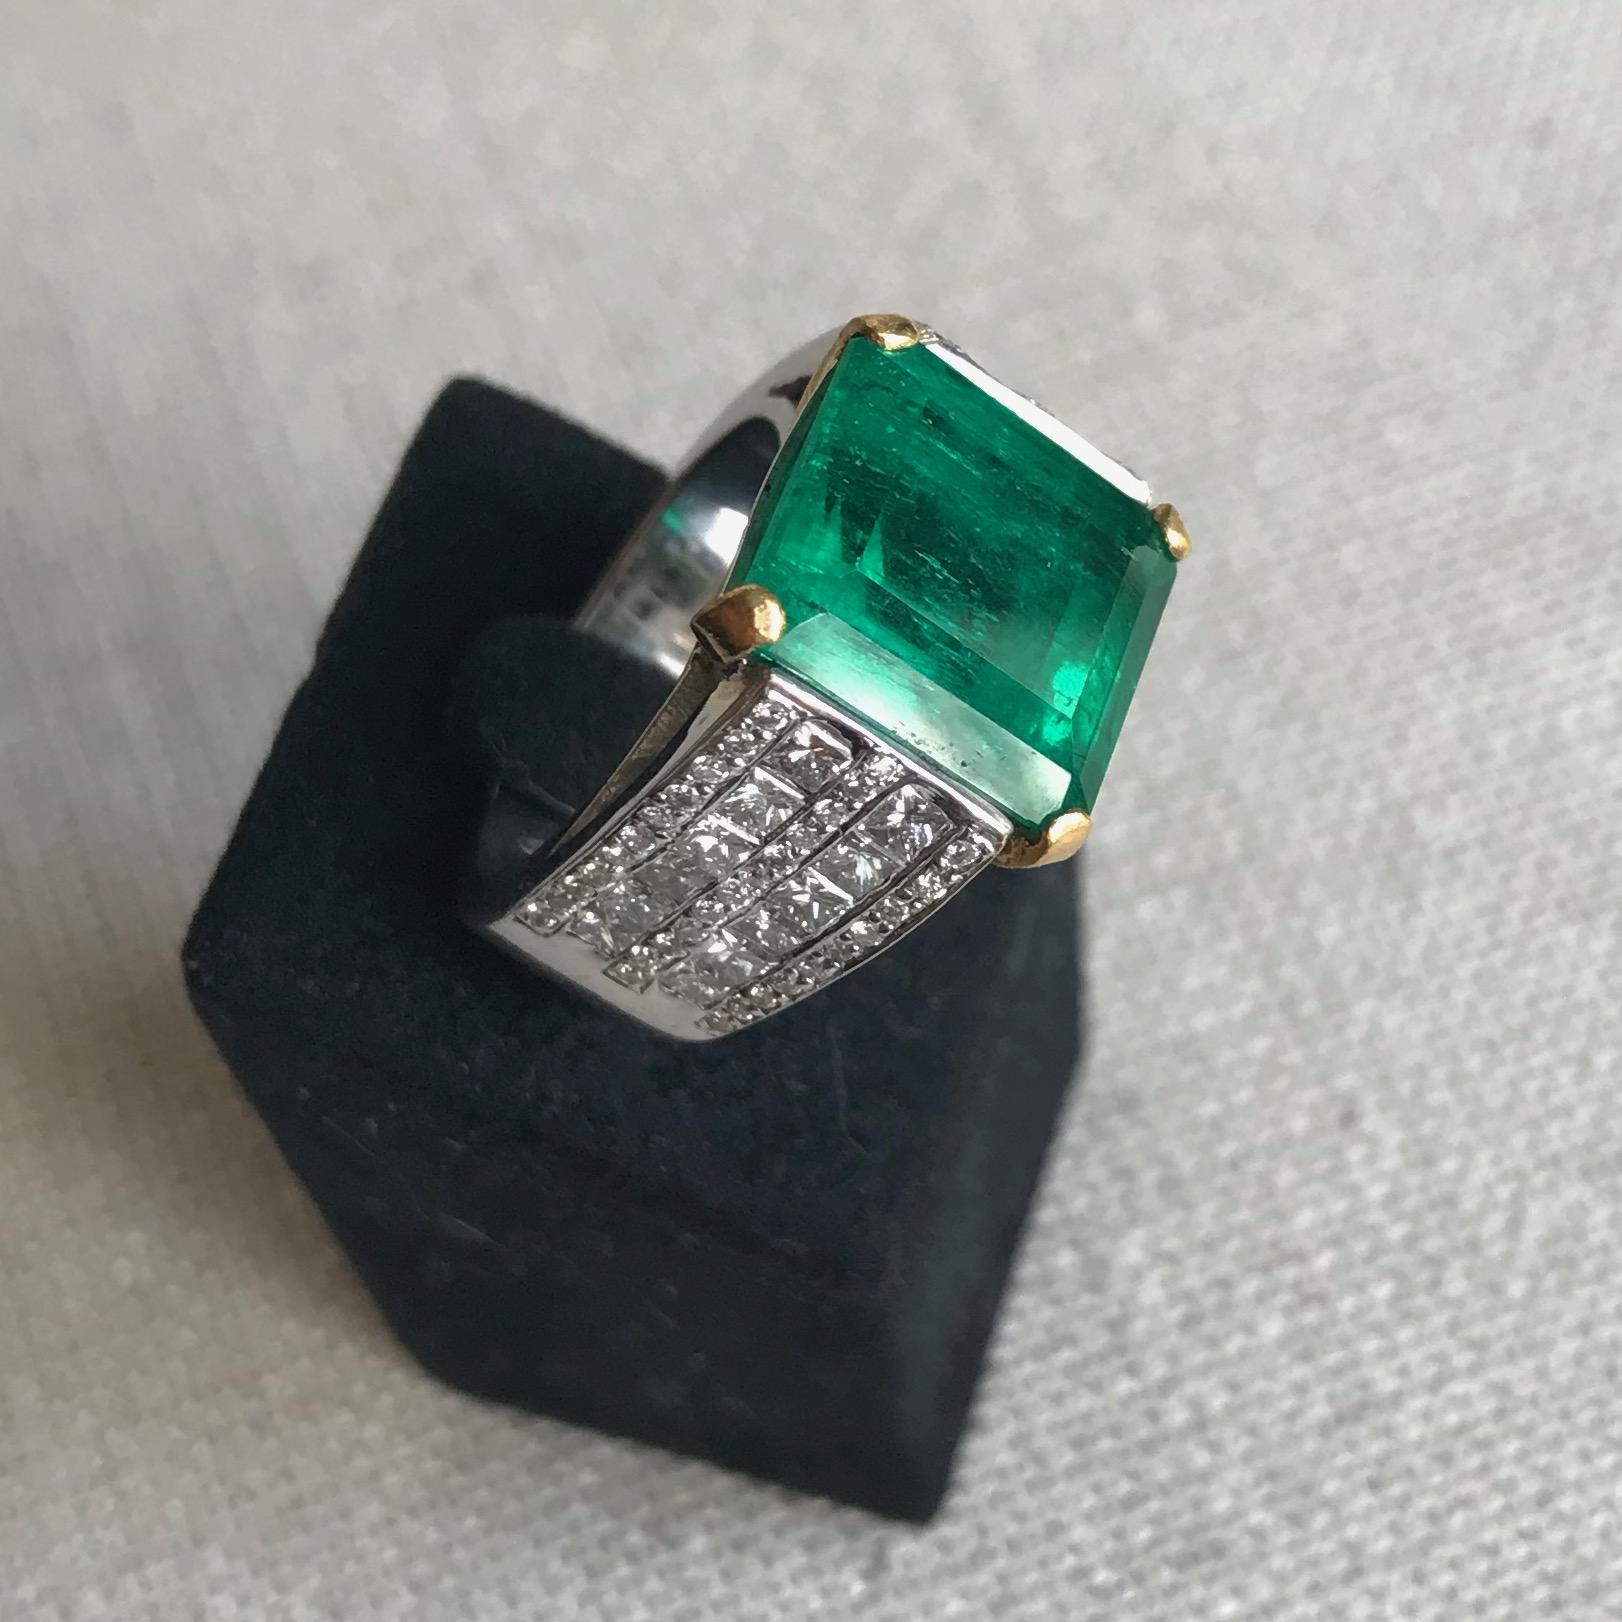 Emerald Ring in 18 K Yellow gold and 18-karat white gold, diamonds and 9.05-carat Emerald.
Important signet ring in 18 carat white gold, basket in 18 carat yellow gold retaining in its center an important emerald cut emerald set with prongs weighing